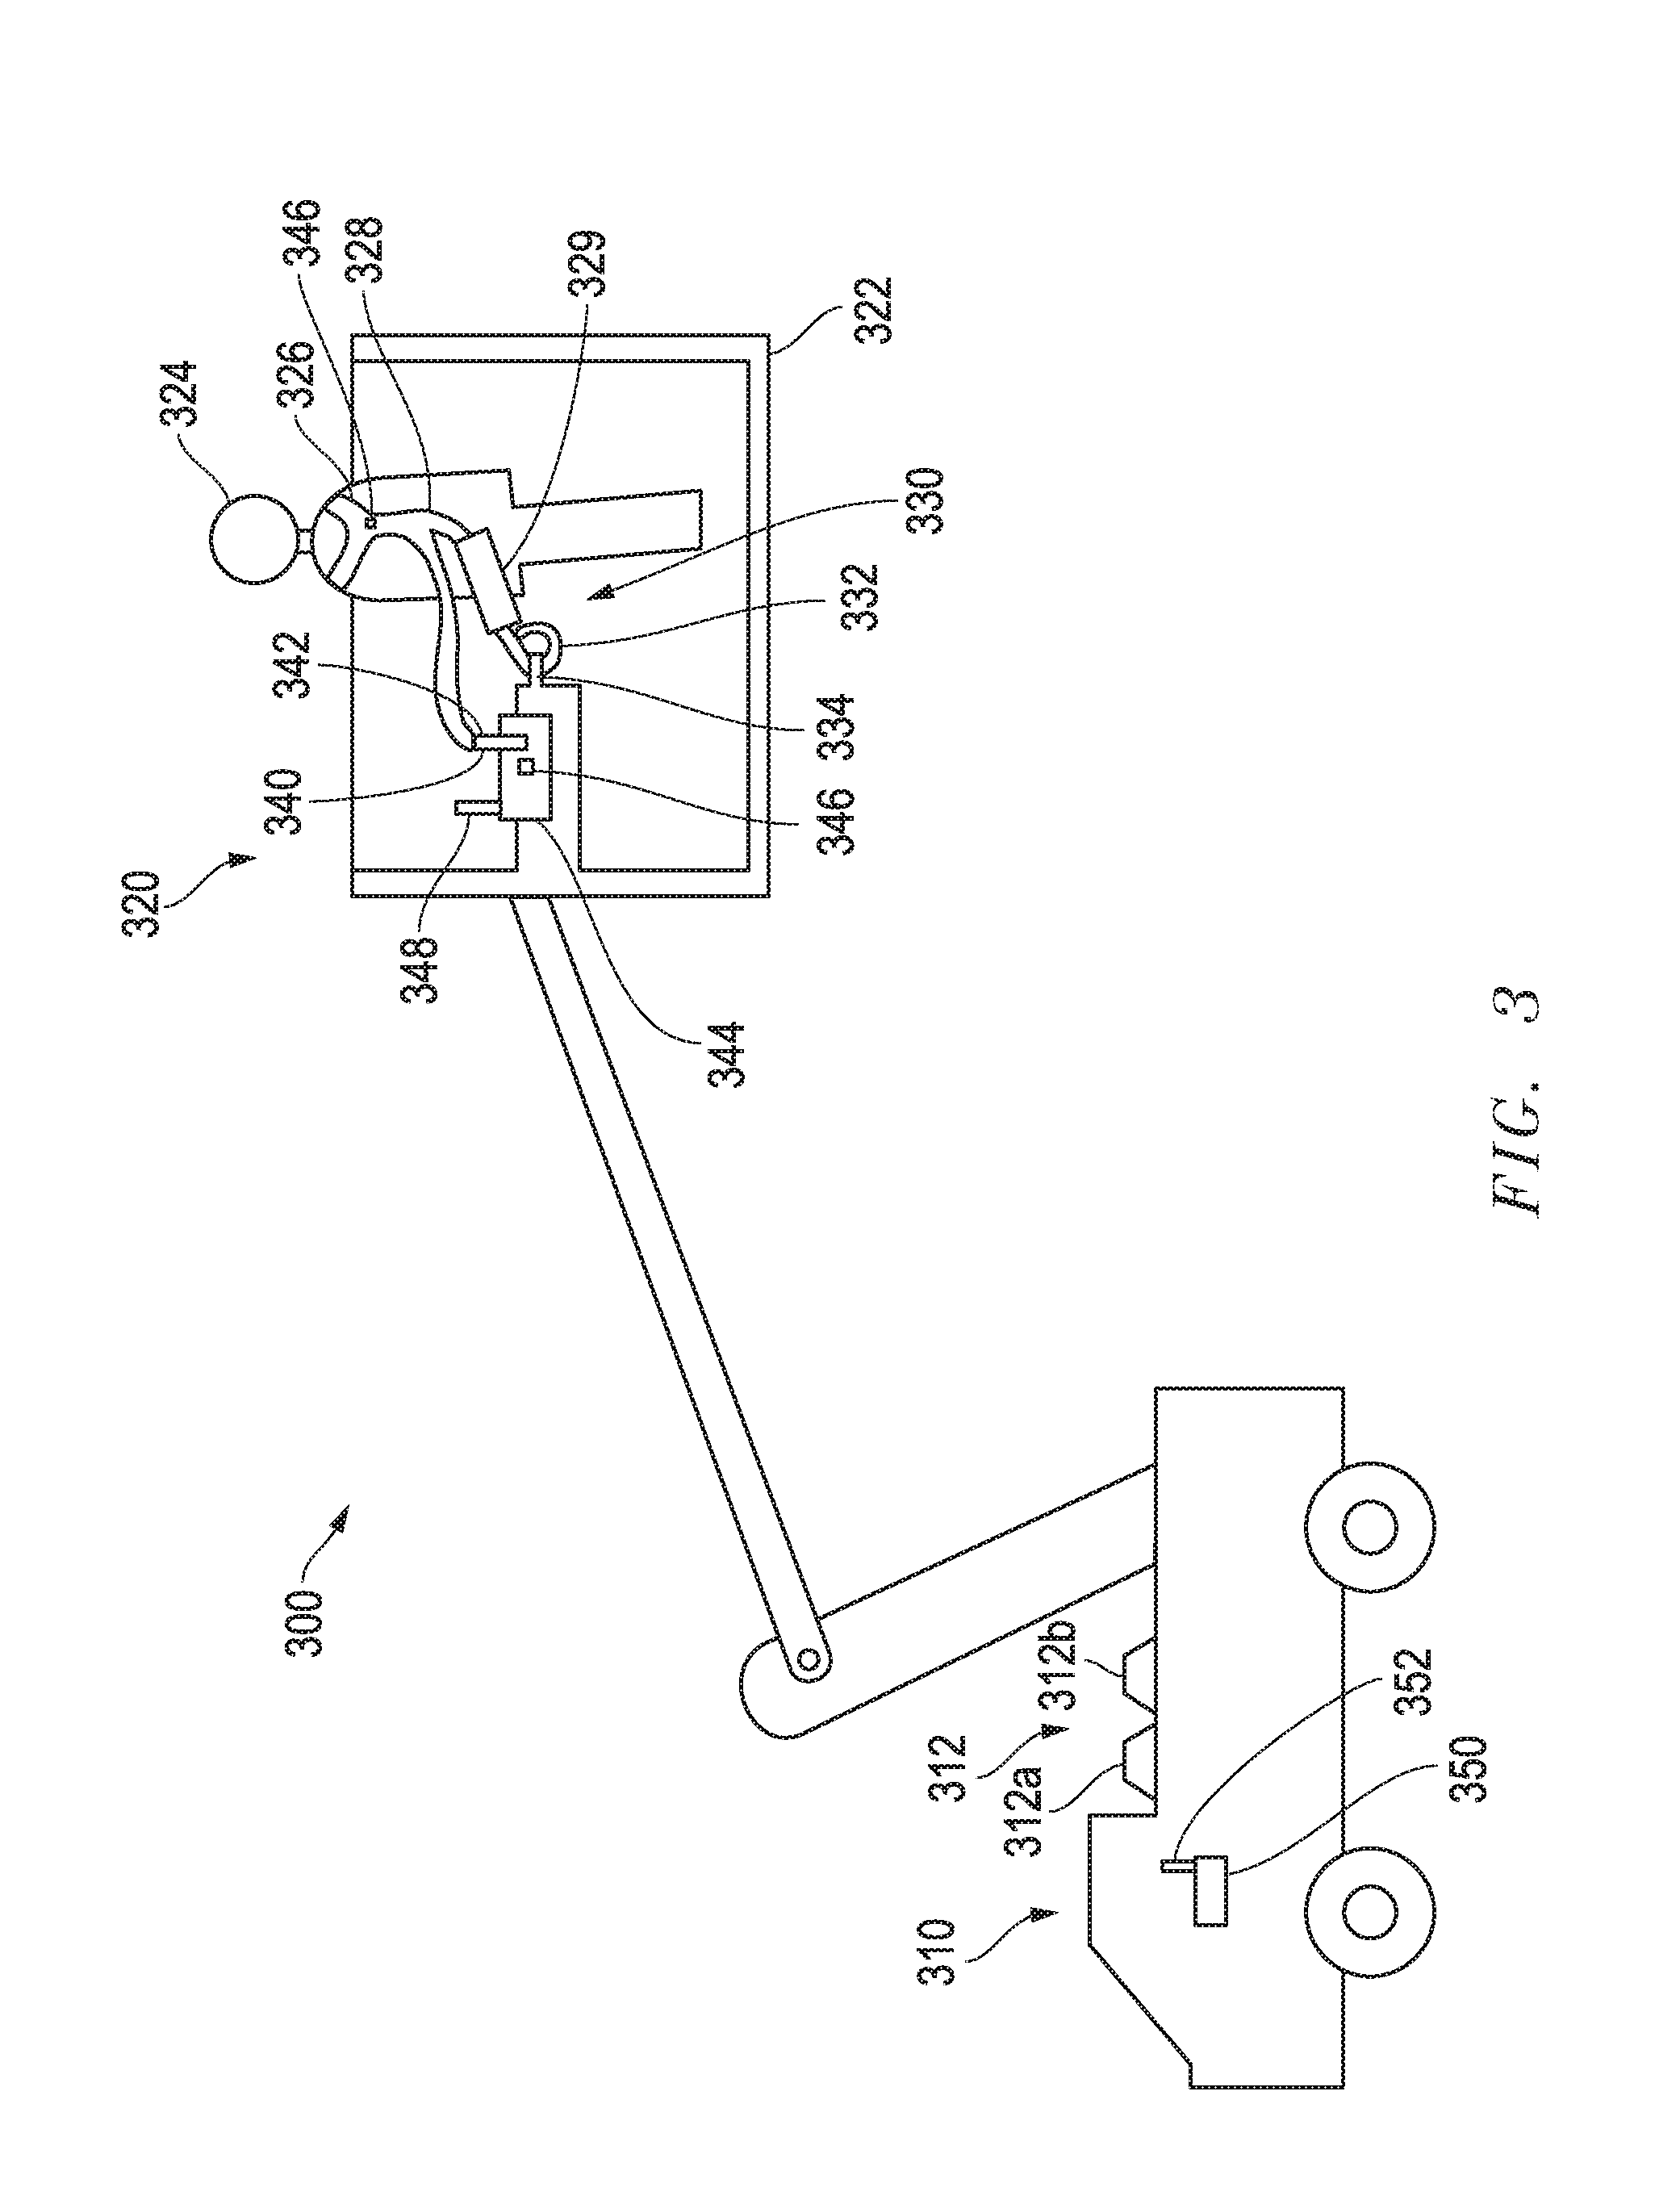 Aerialift Safety Device and Fall Restraint